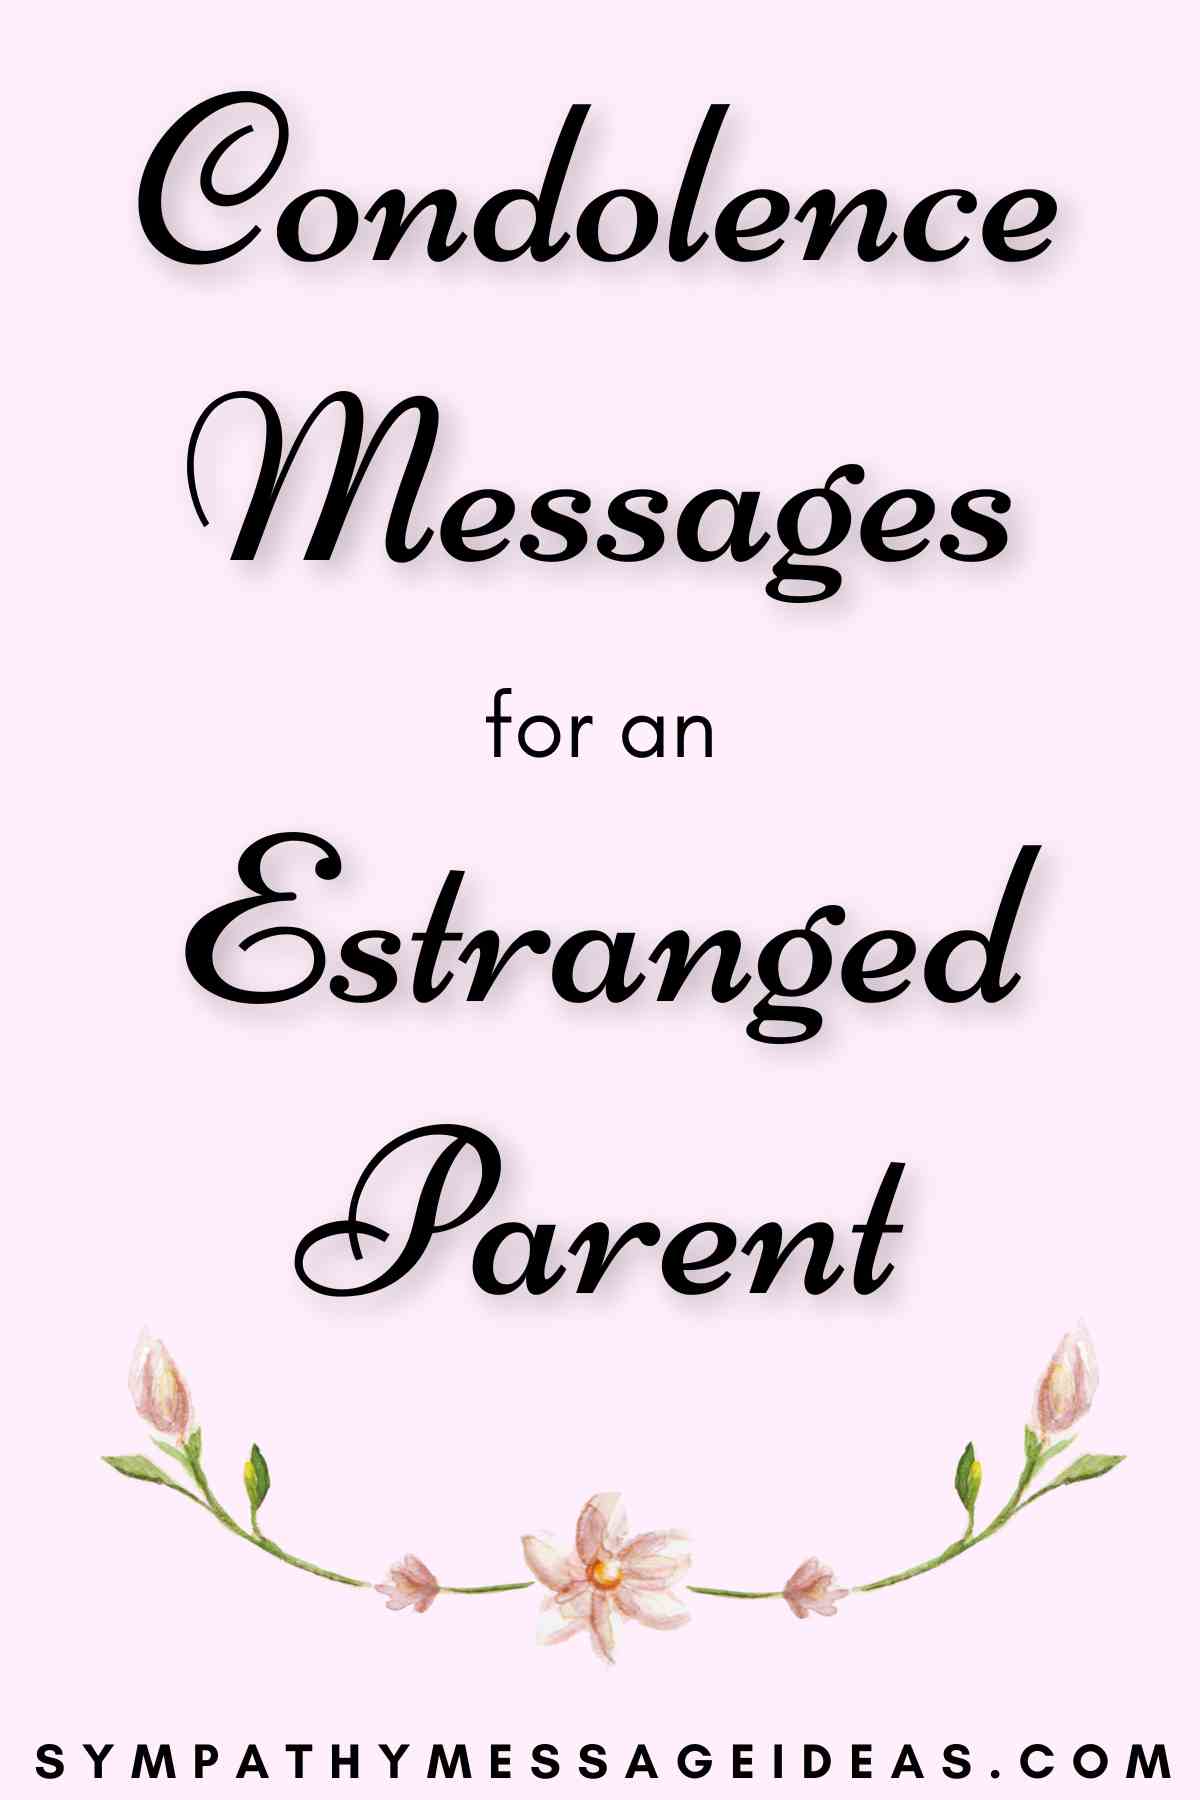 condolence messages for loss of estranged parent